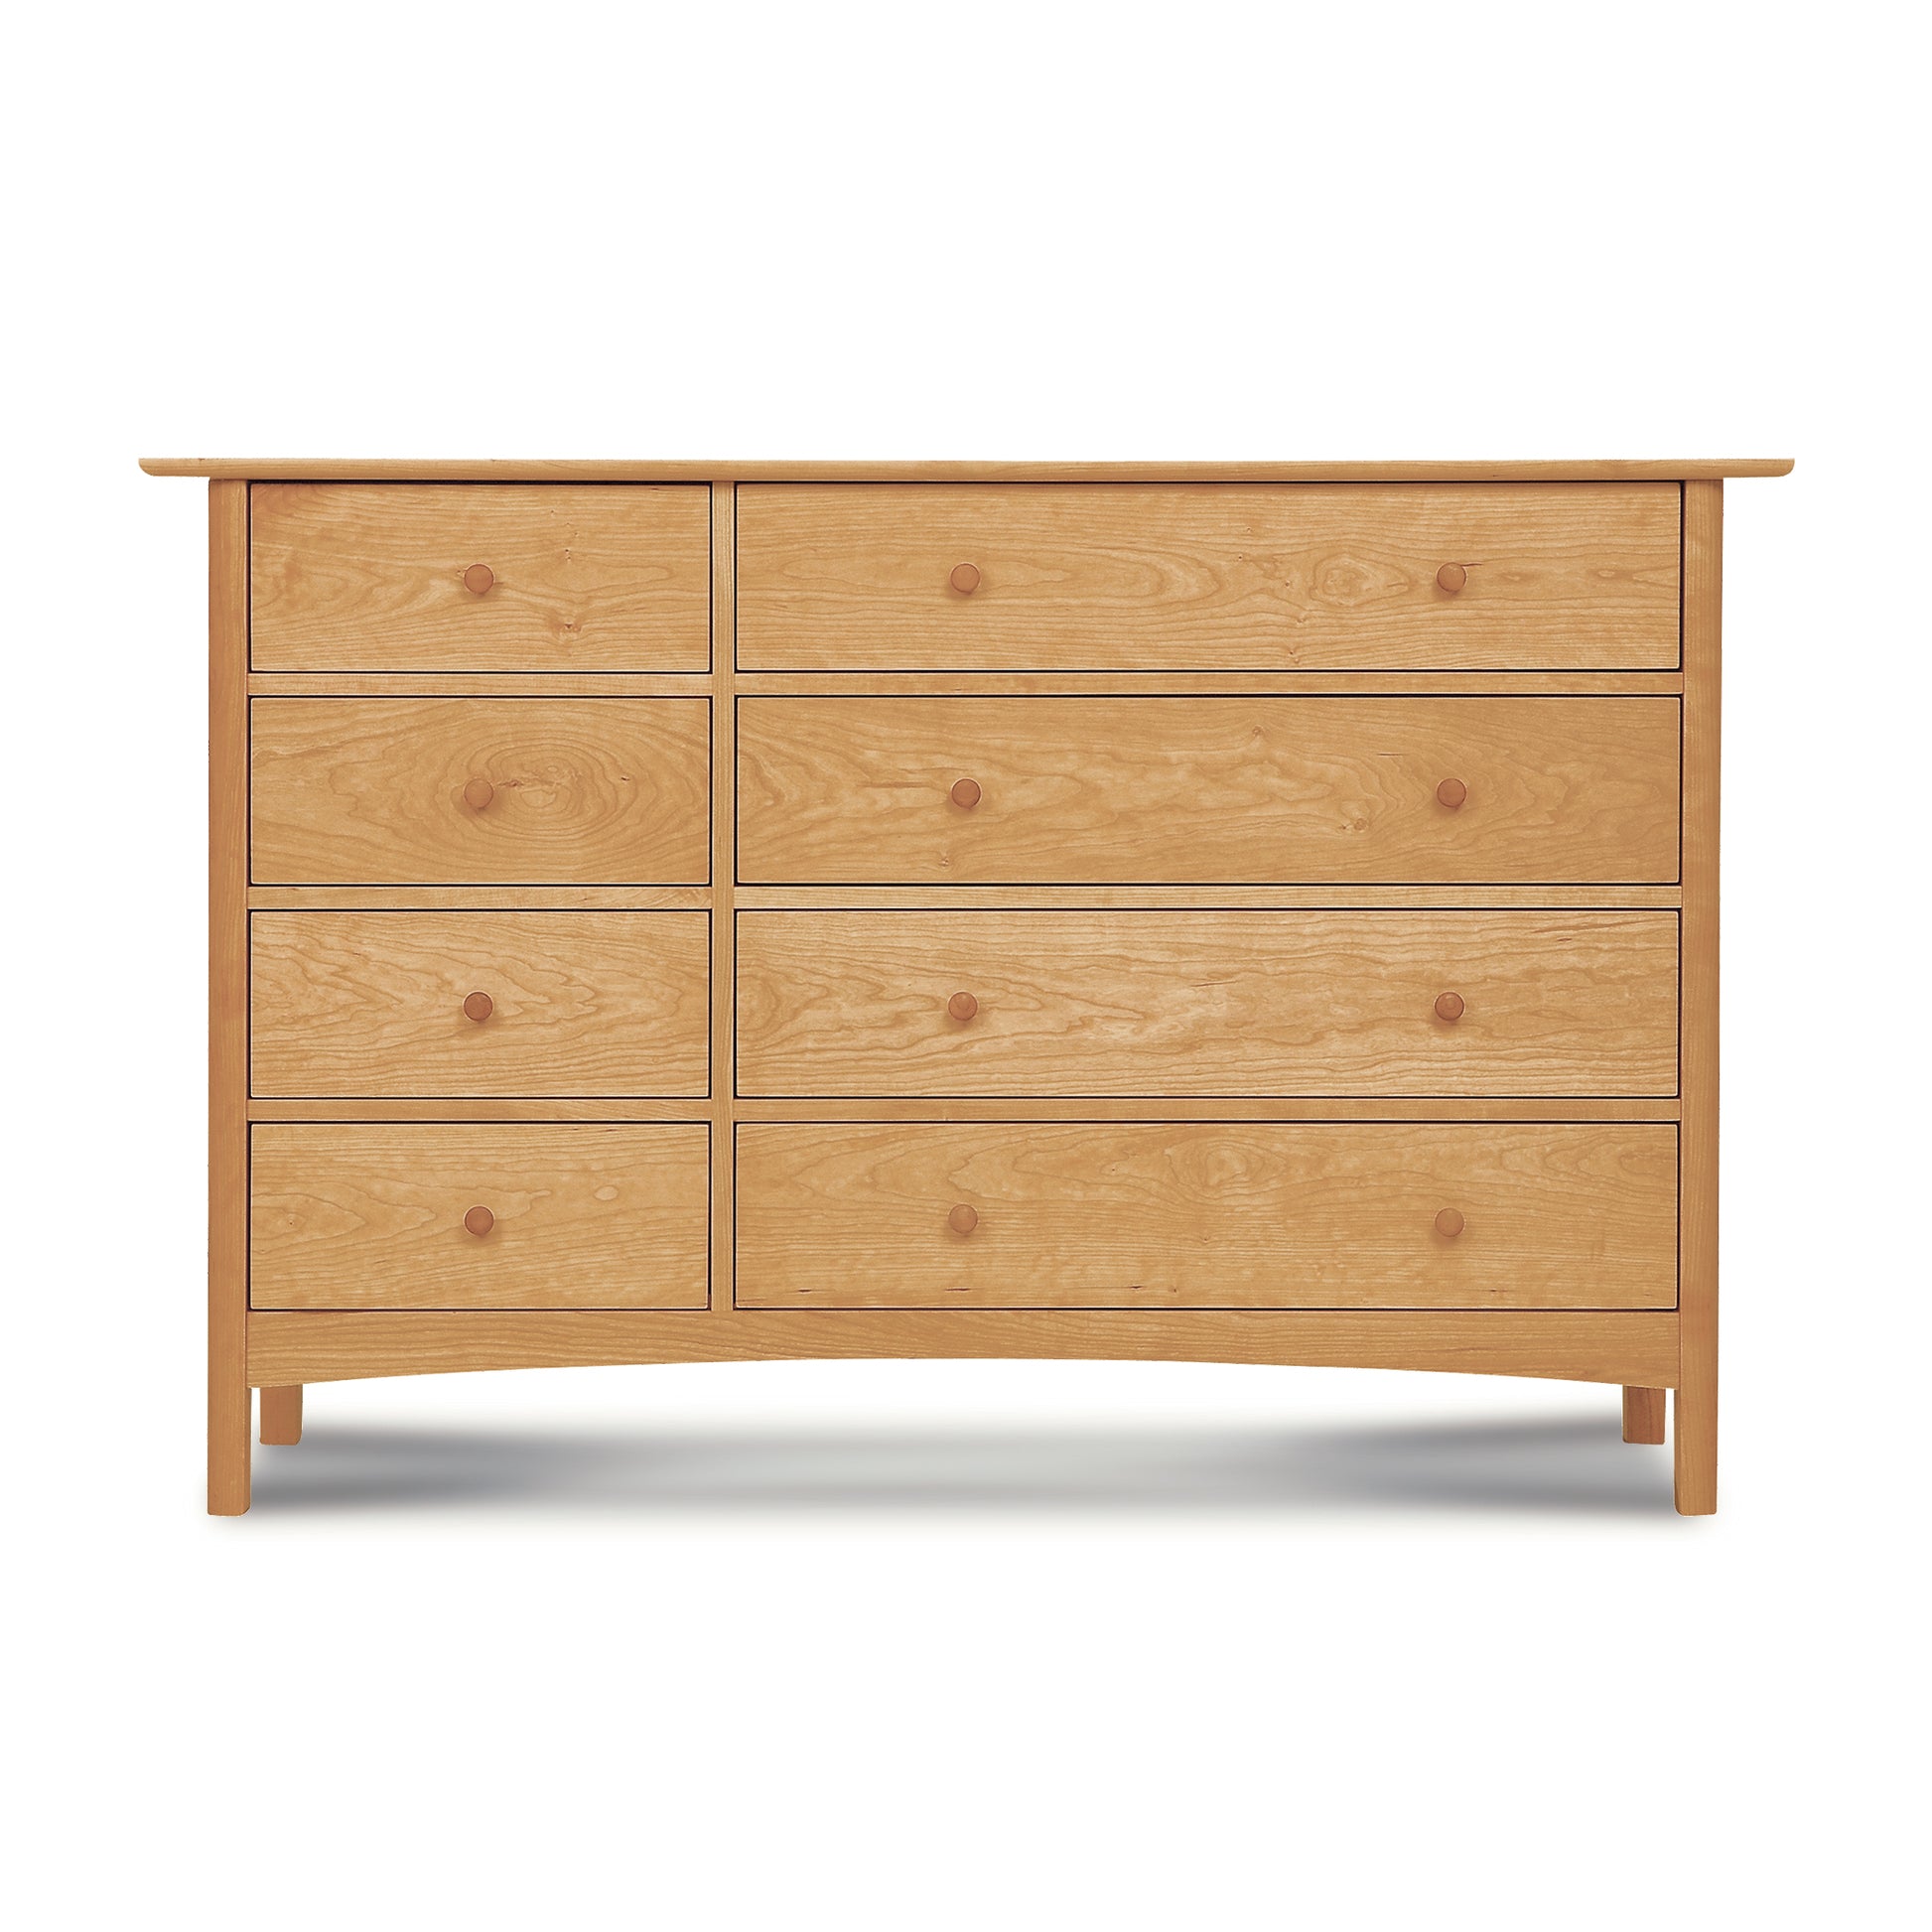 A luxurious Heartwood Shaker 8-Drawer Dresser #2 by Vermont Furniture Designs on a white background.